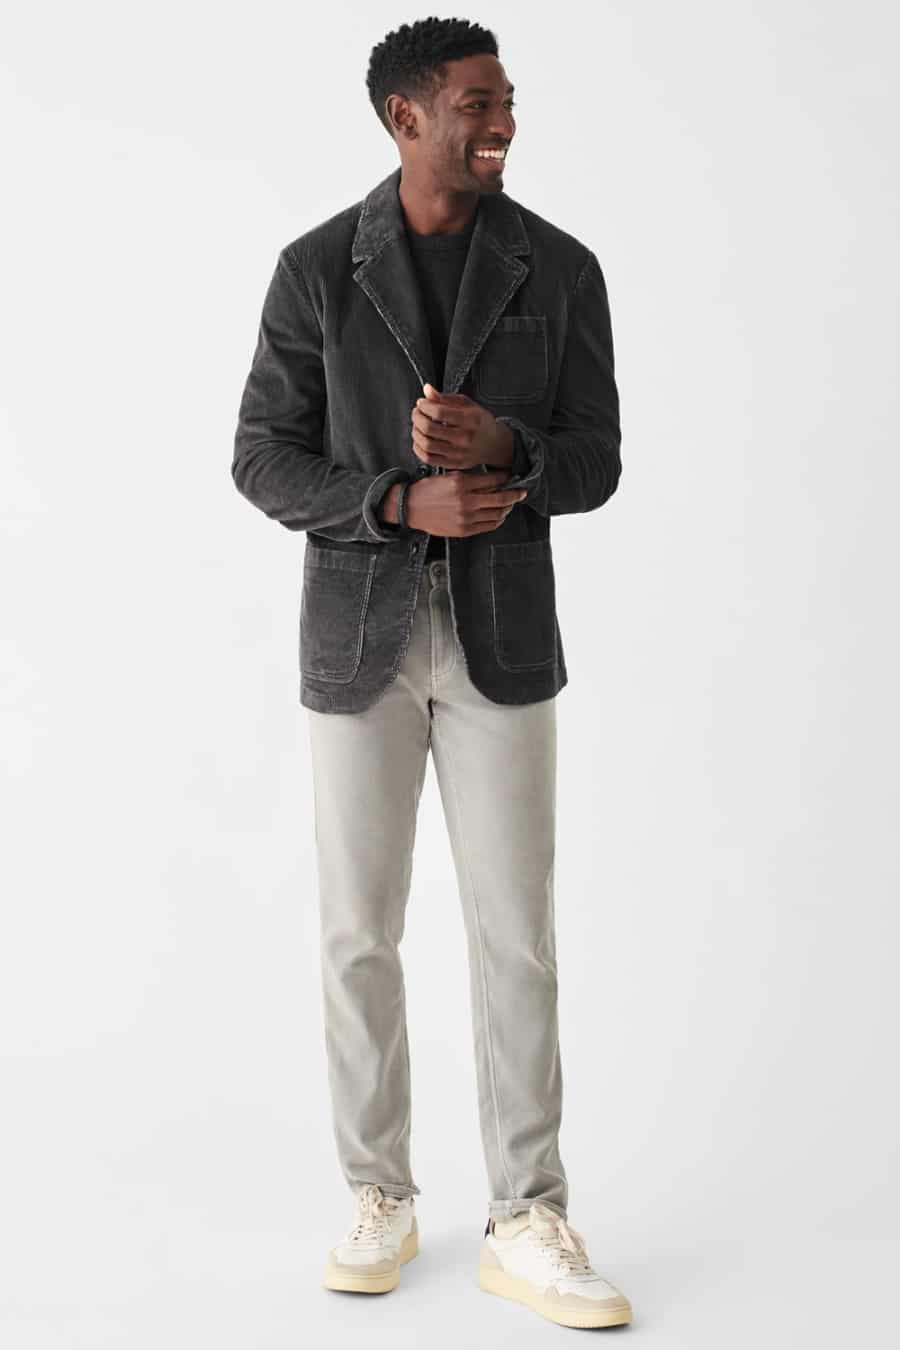 Men's grey jeans, washed black cotton blazer, black T-shirt and white sneakers outfit